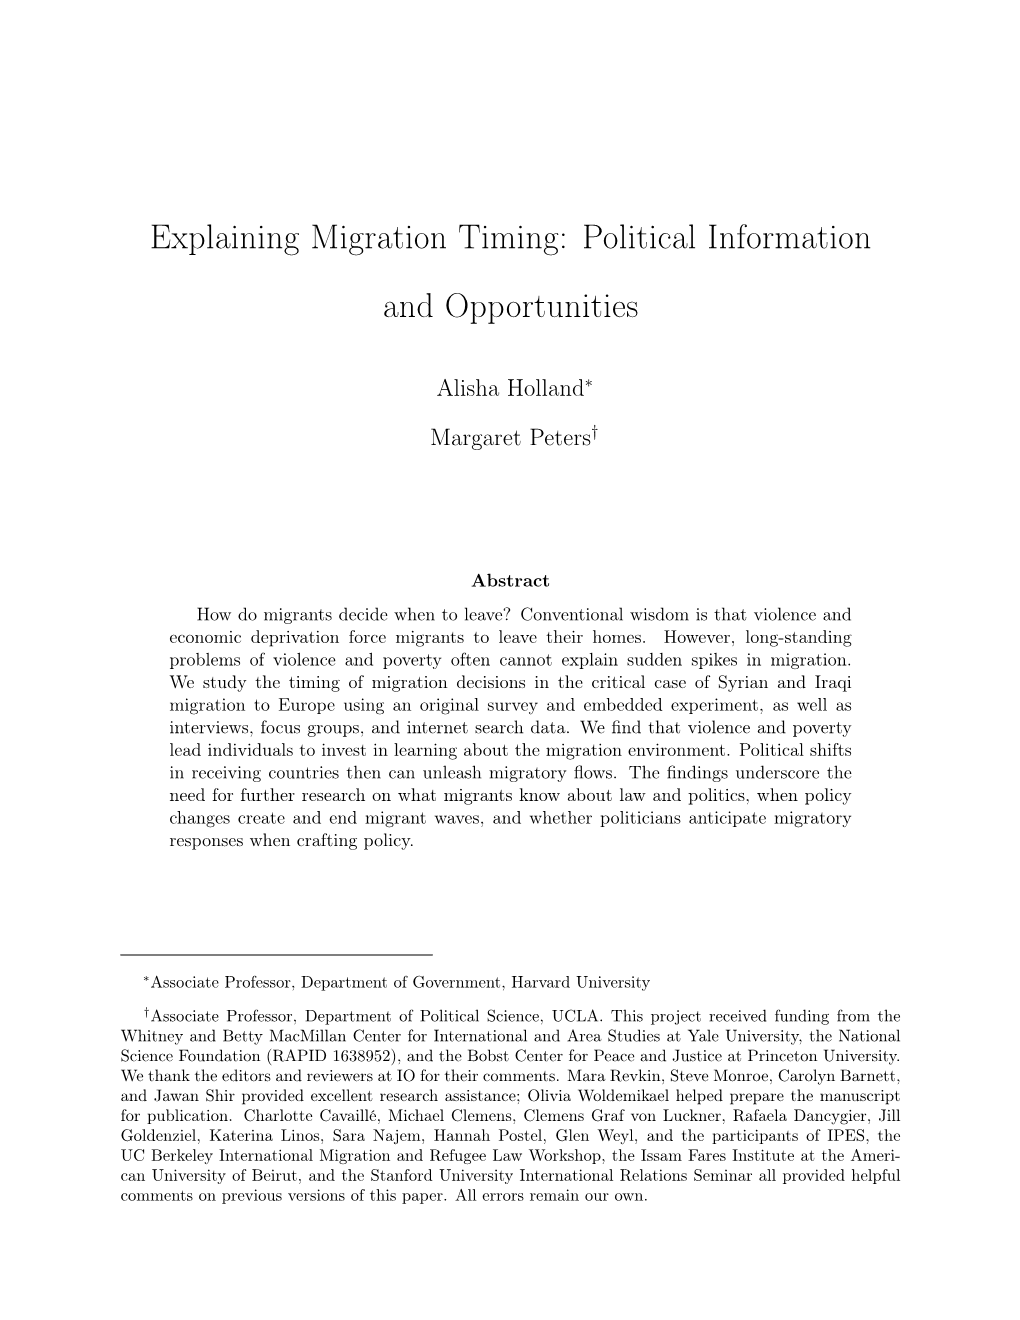 Explaining Migration Timing: Political Information and Opportunities